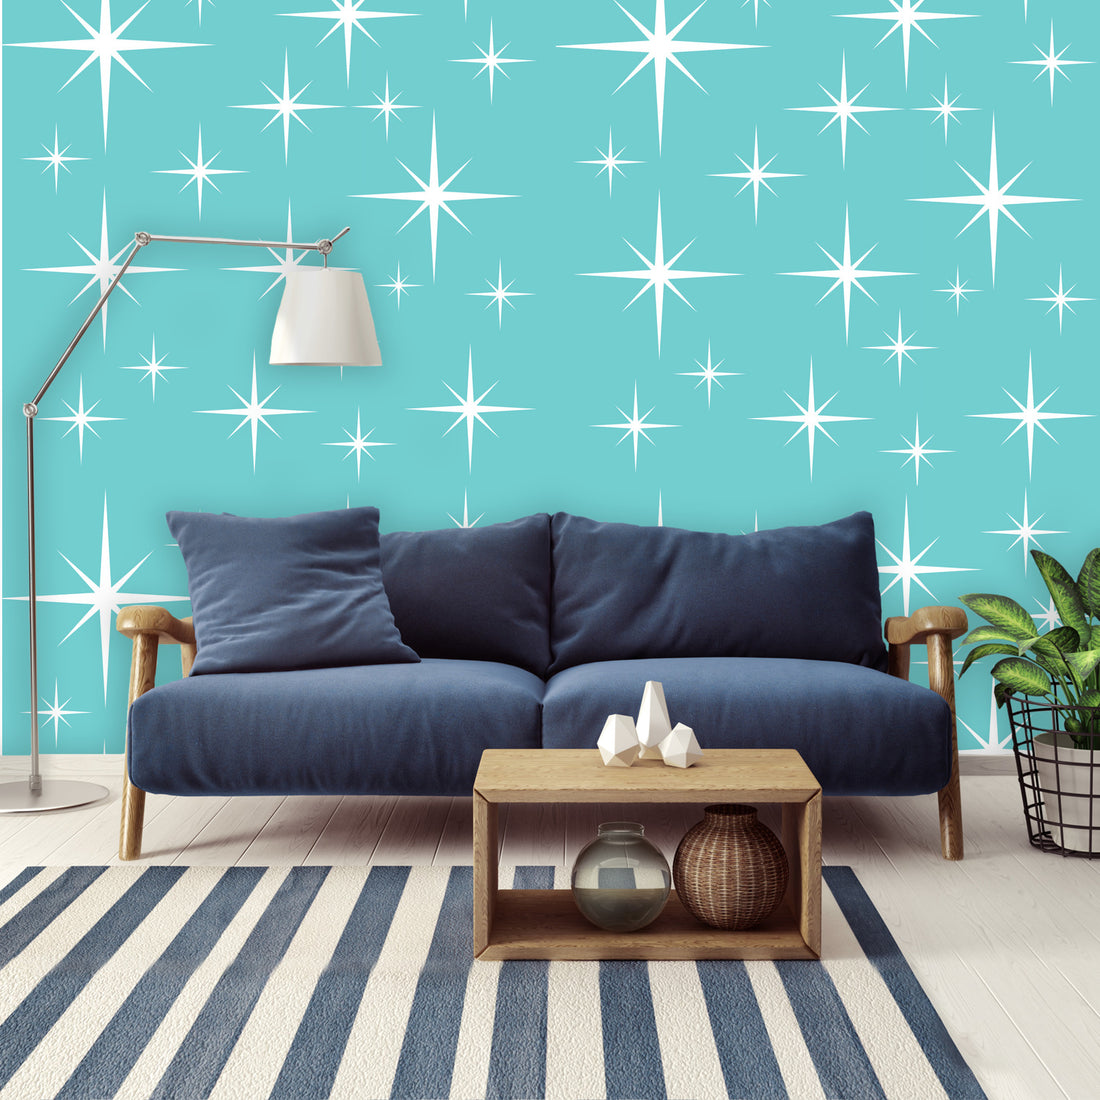 Atomic 50s Starbursts Aqua And White, Mid Century Modern Removeable Peel And Stick Wall Murals